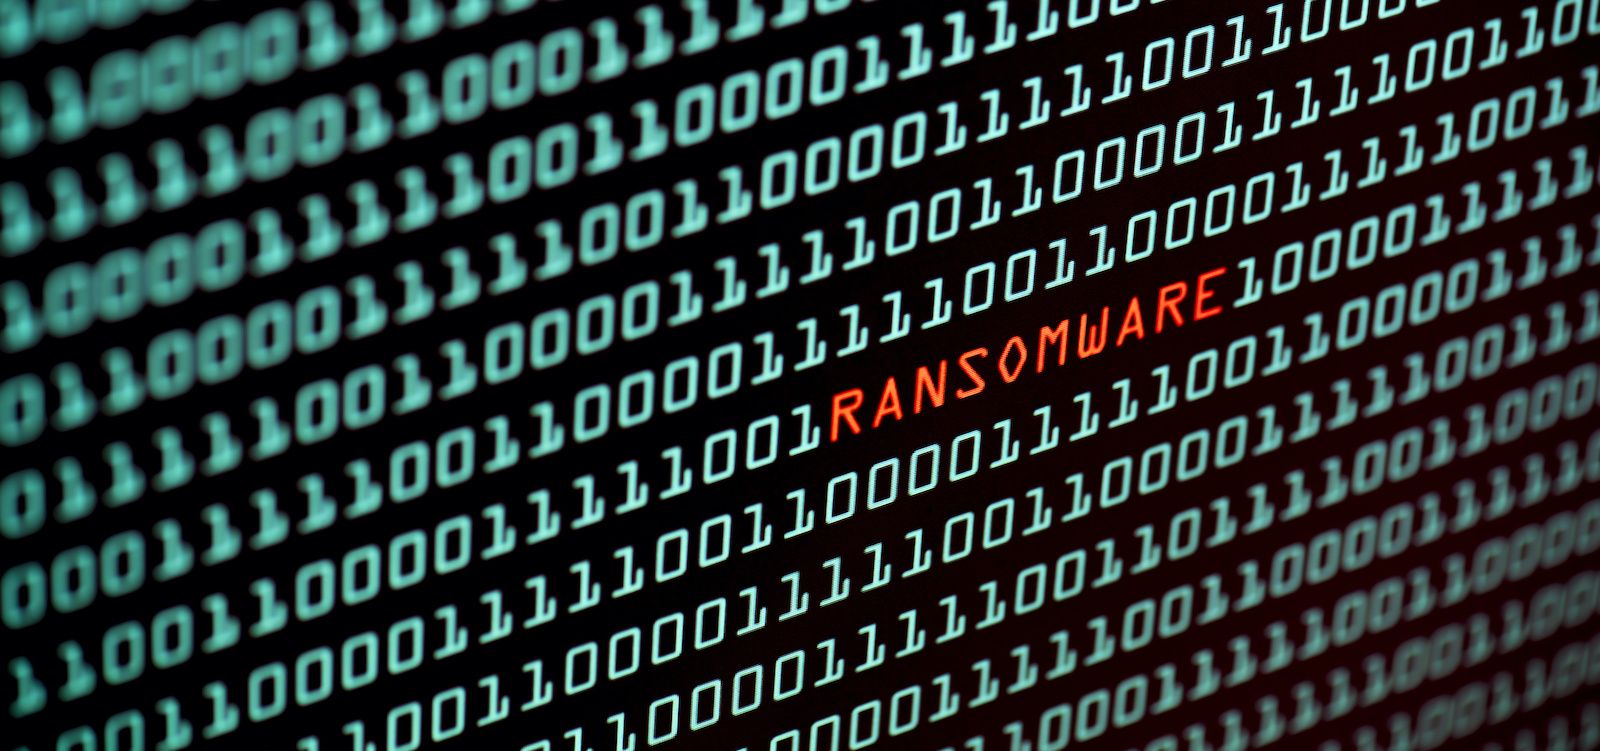 What We Know About The Kaseya Ransomware Attack